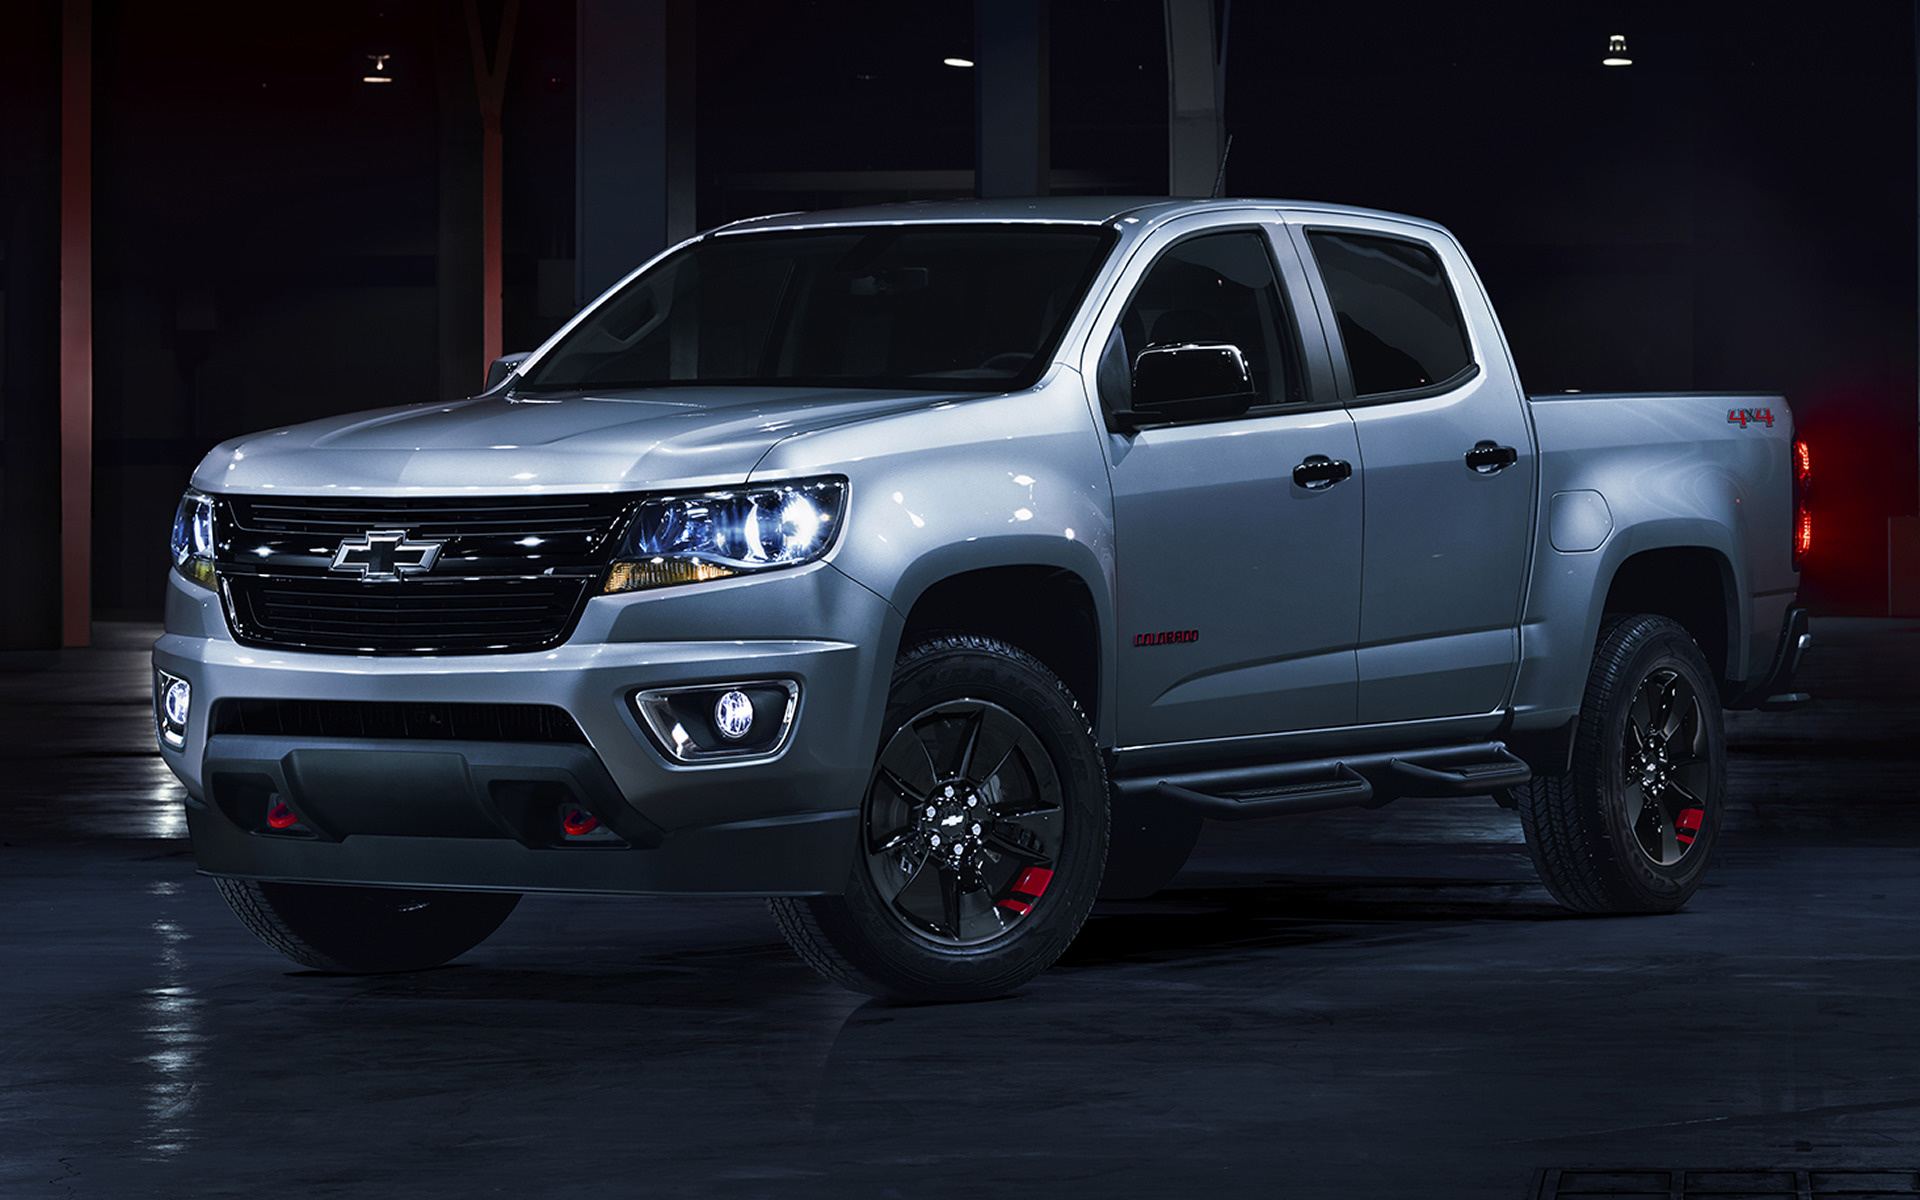 Free download Chevrolet Colorado Wallpaper and Background Image stmednet [1920x1200] for your Desktop, Mobile & Tablet. Explore Chevrolet Wallpaper. Chevrolet Wallpaper, Chevrolet Chevelle Wallpaper, Chevrolet Equinox Wallpaper